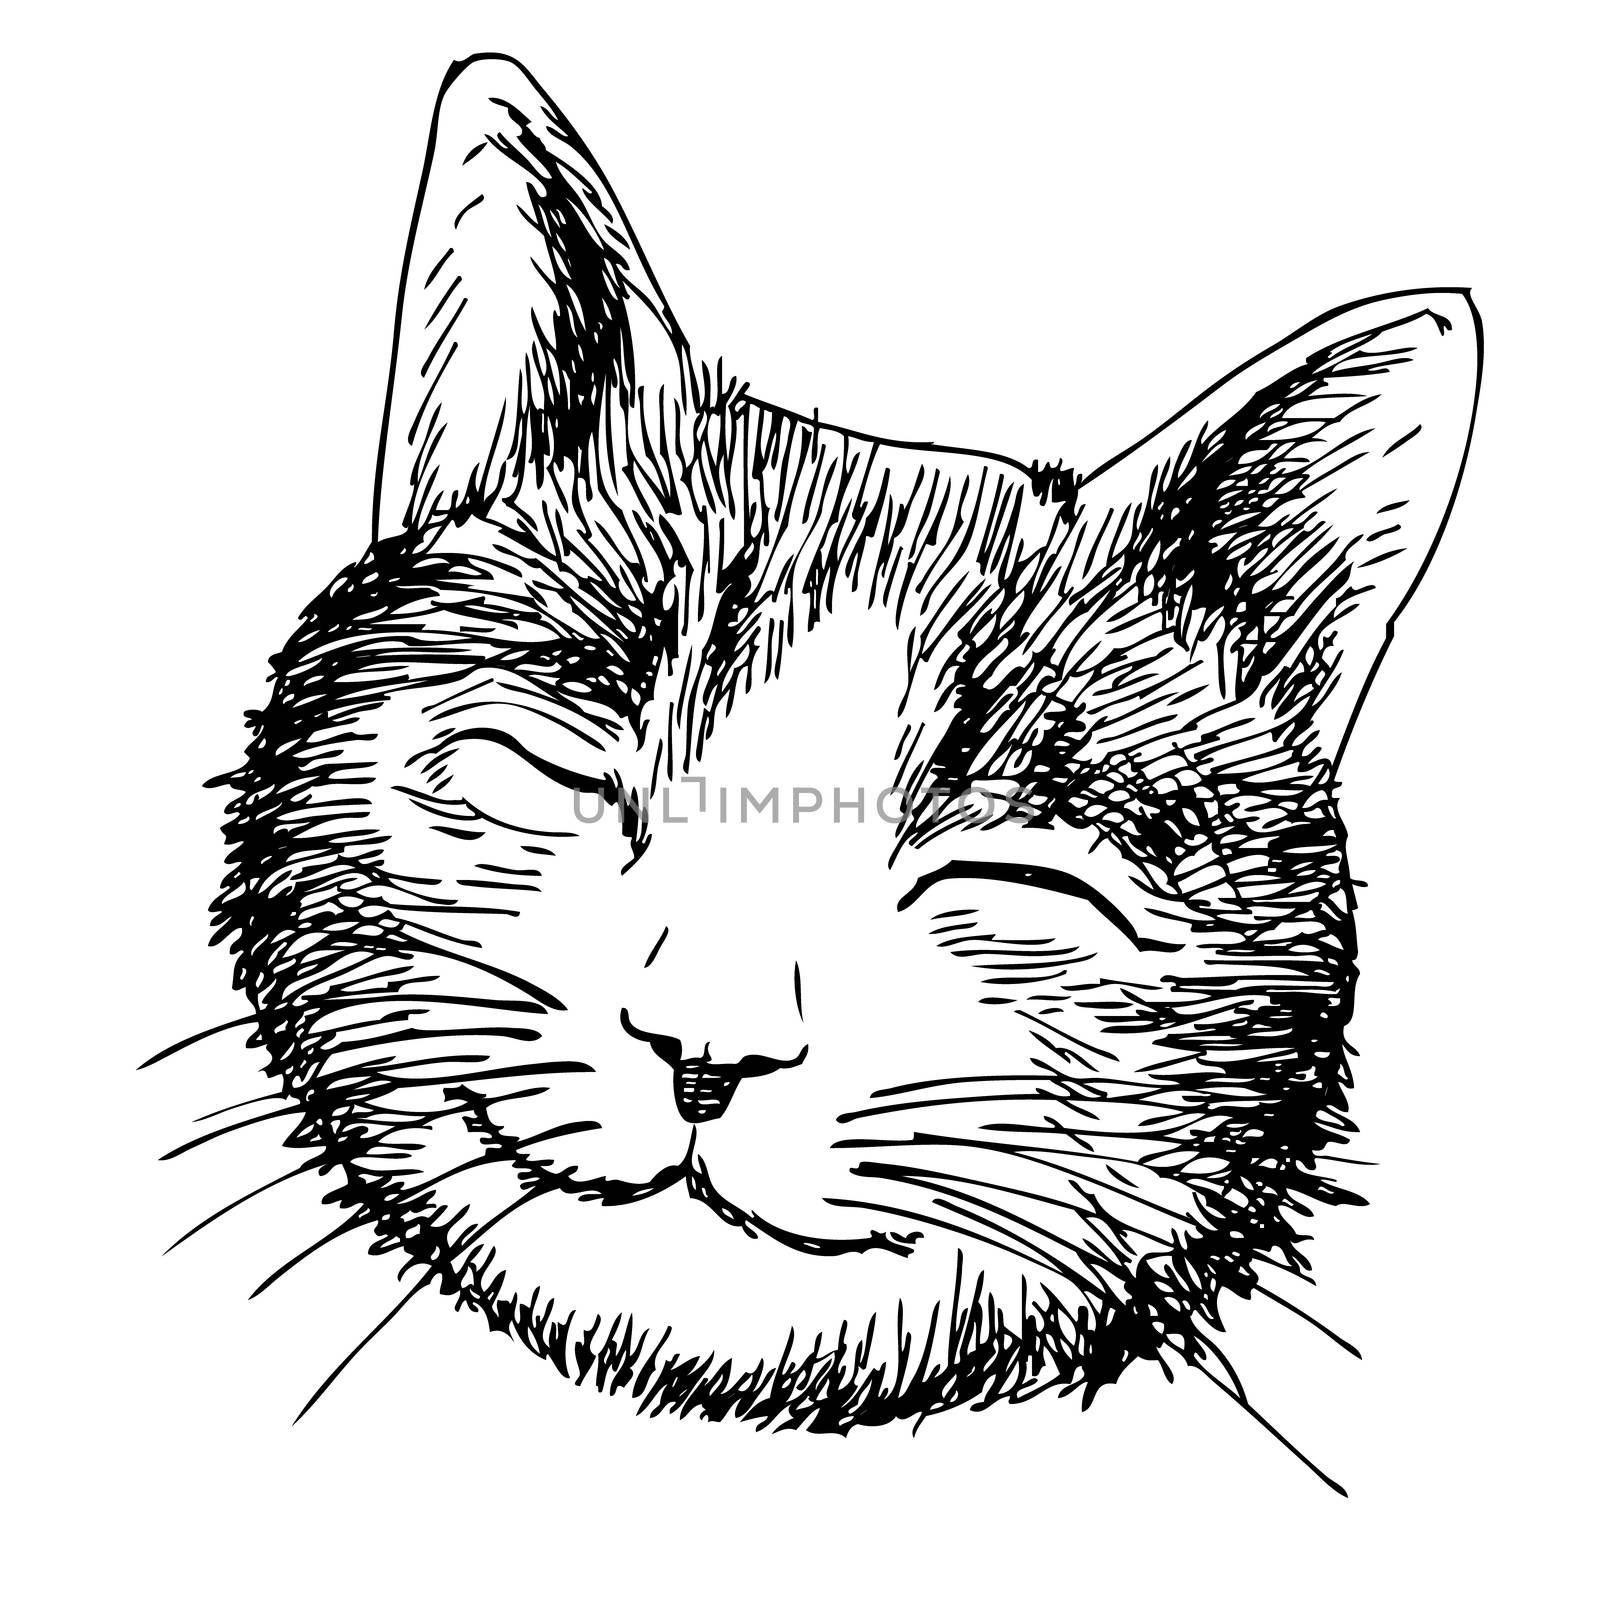 freehand sketch of smile cat head hand drawn on white background